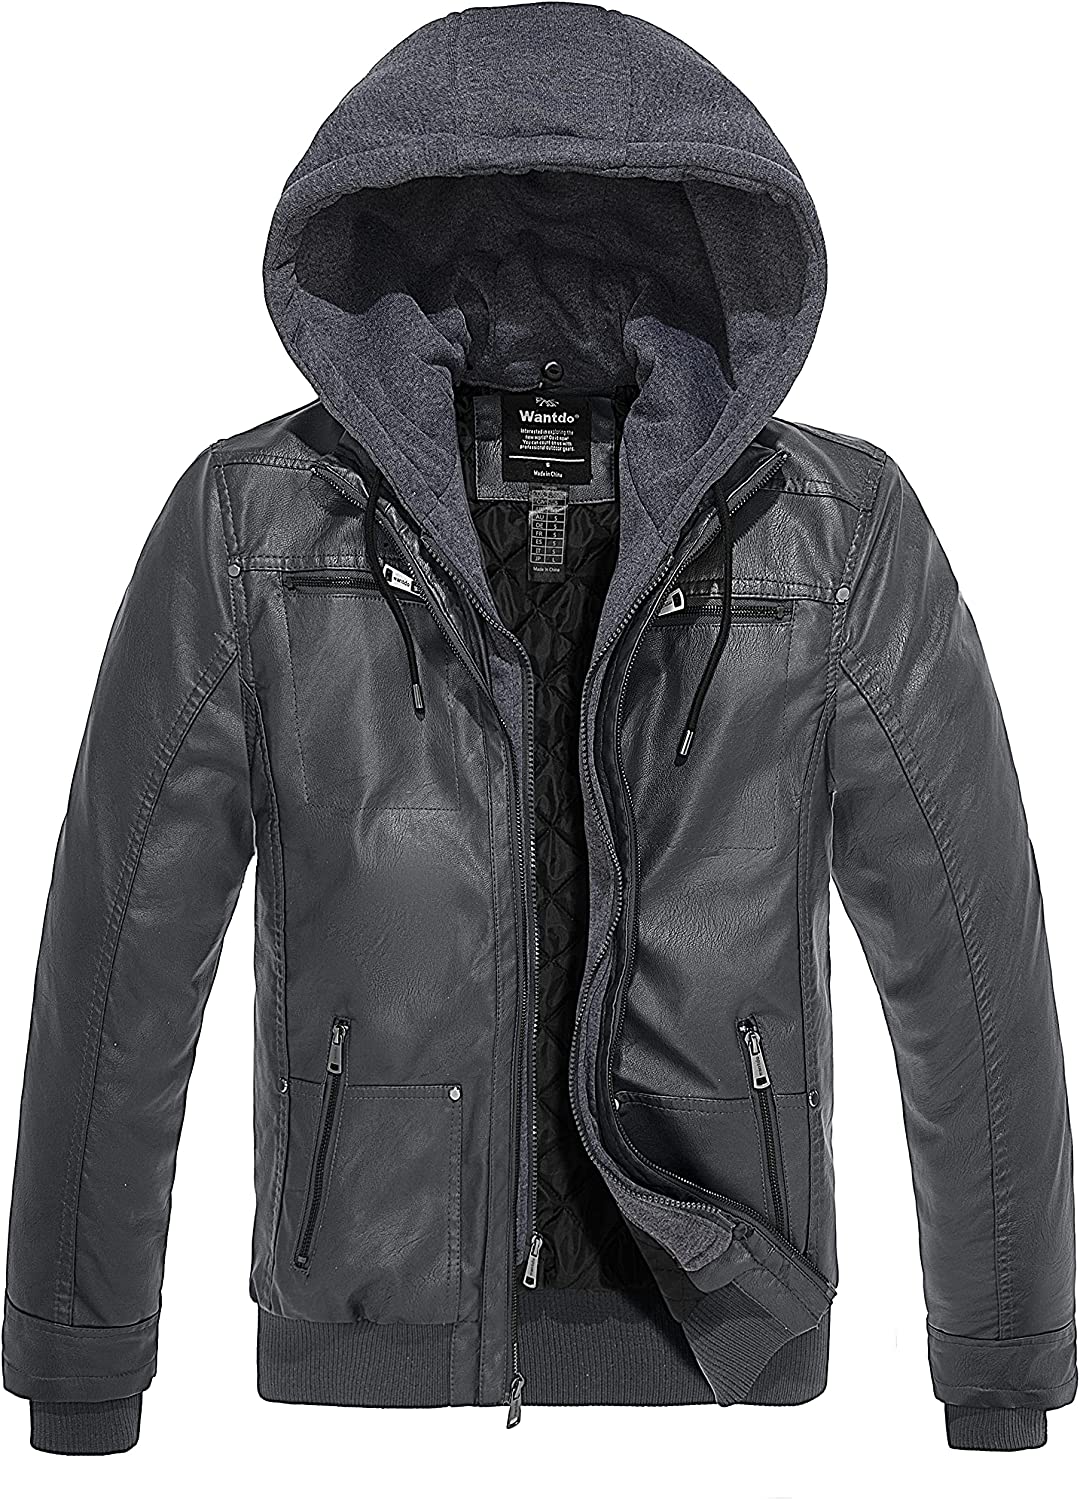 Wantdo Men\'s Faux Leather Jacket with | Hood Vi Motorcycle eBay Removable Casual Jacket